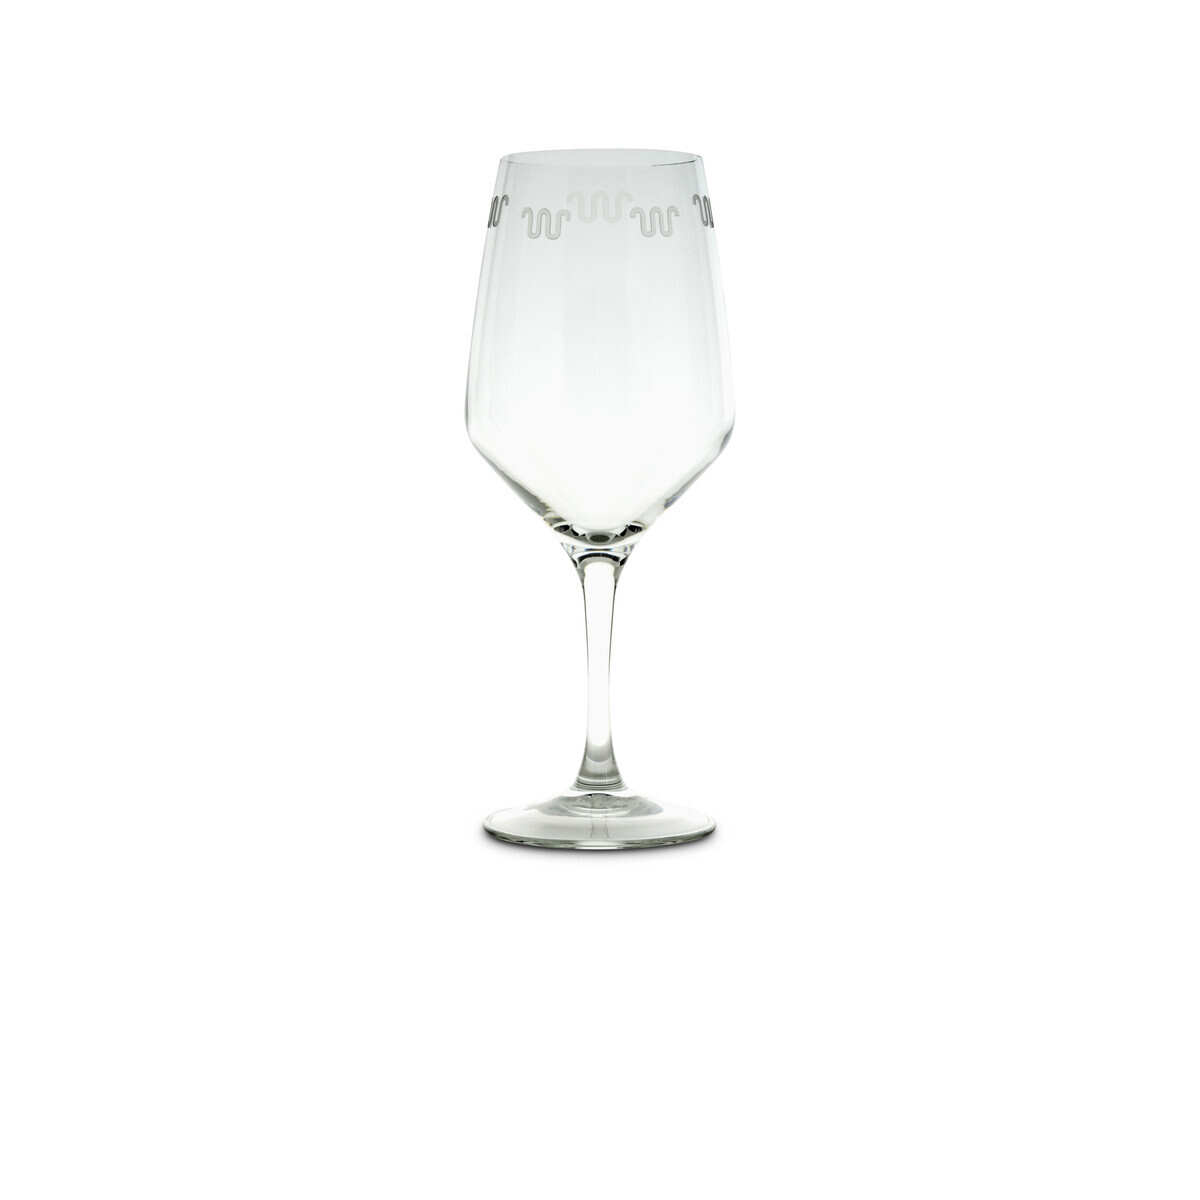 RUNNING W® ETCHED ALL PURPOSE WINE GLASS